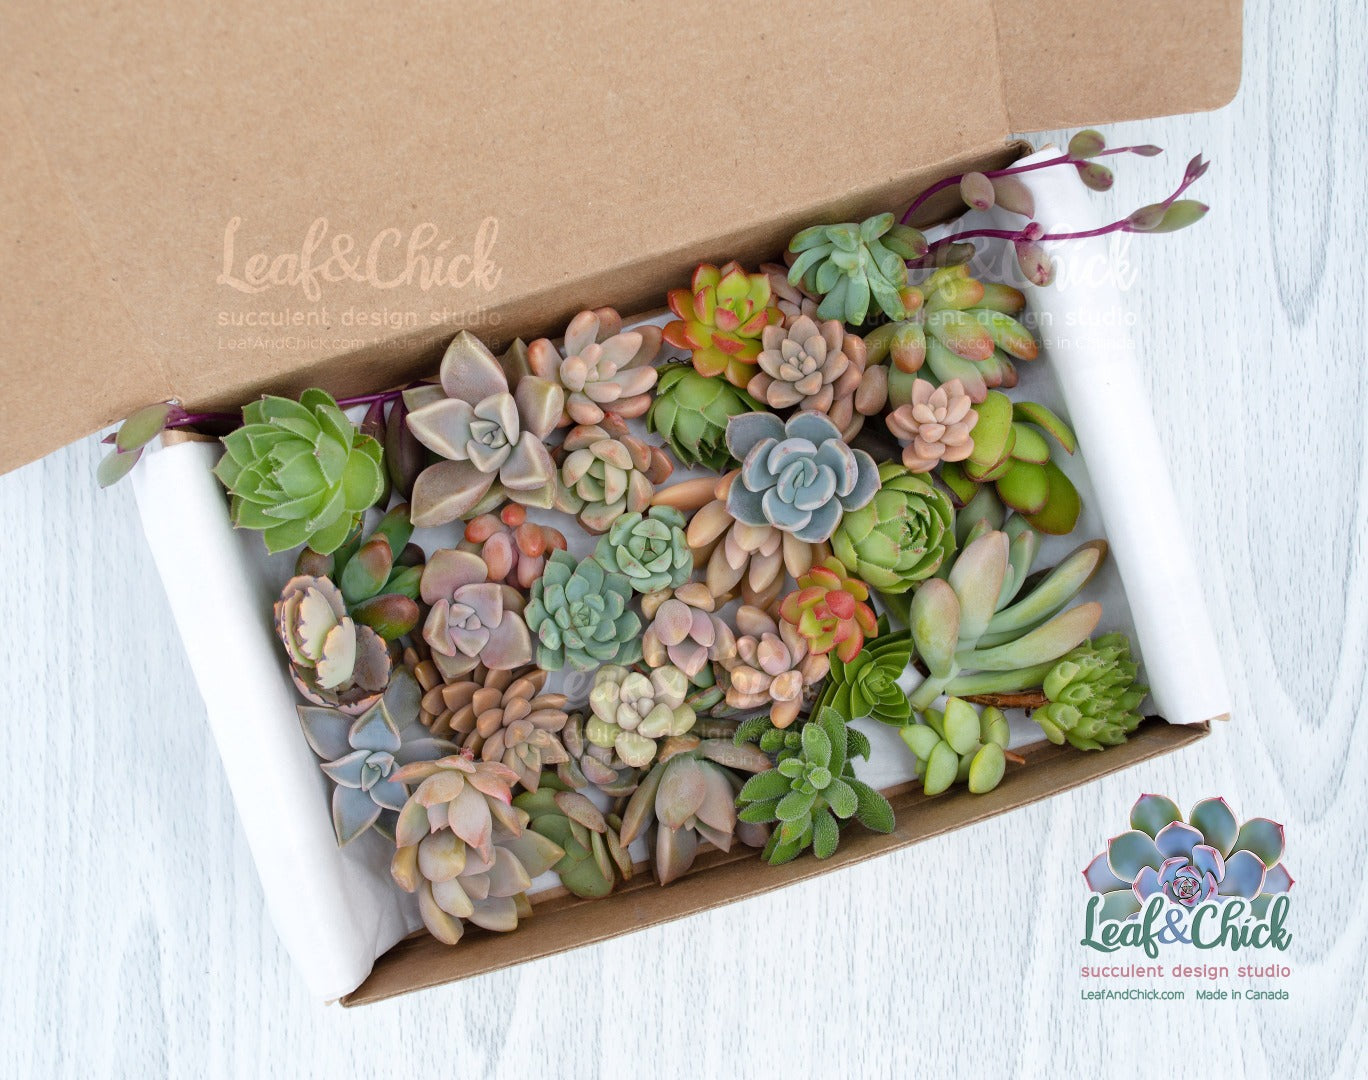 40 succulent cuttings boxed and ready to ship